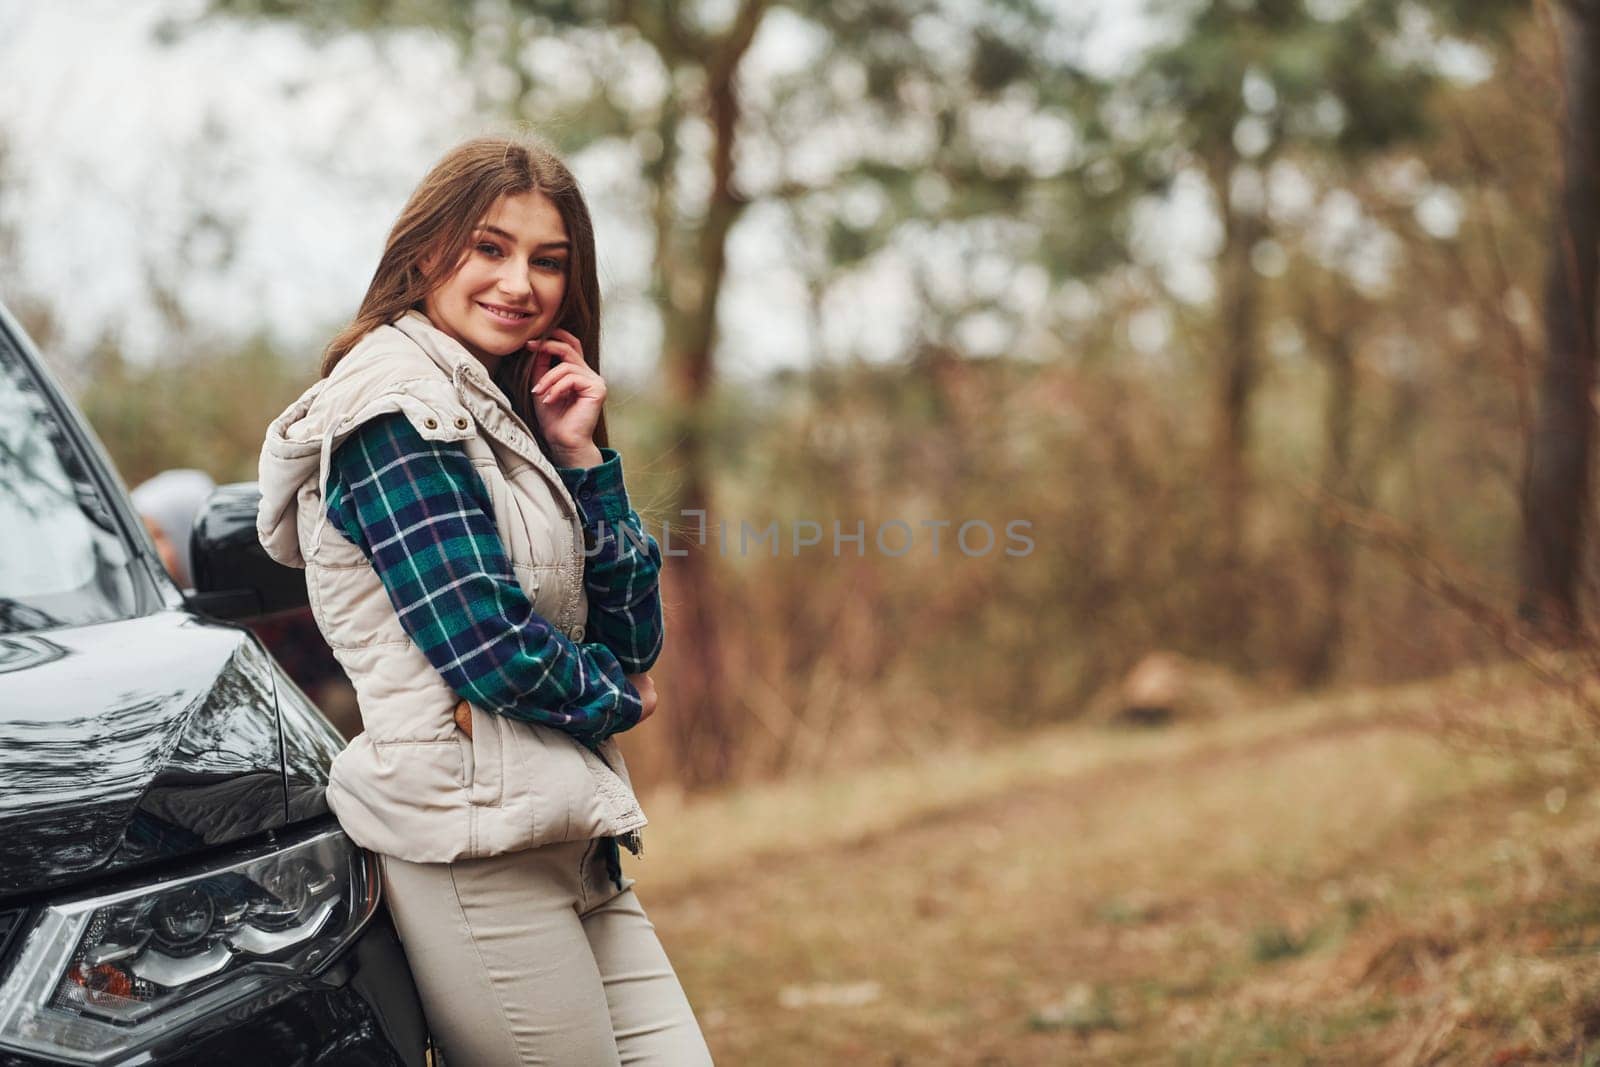 Young cheerful girl standing near modern black car outdoors in the forest by Standret